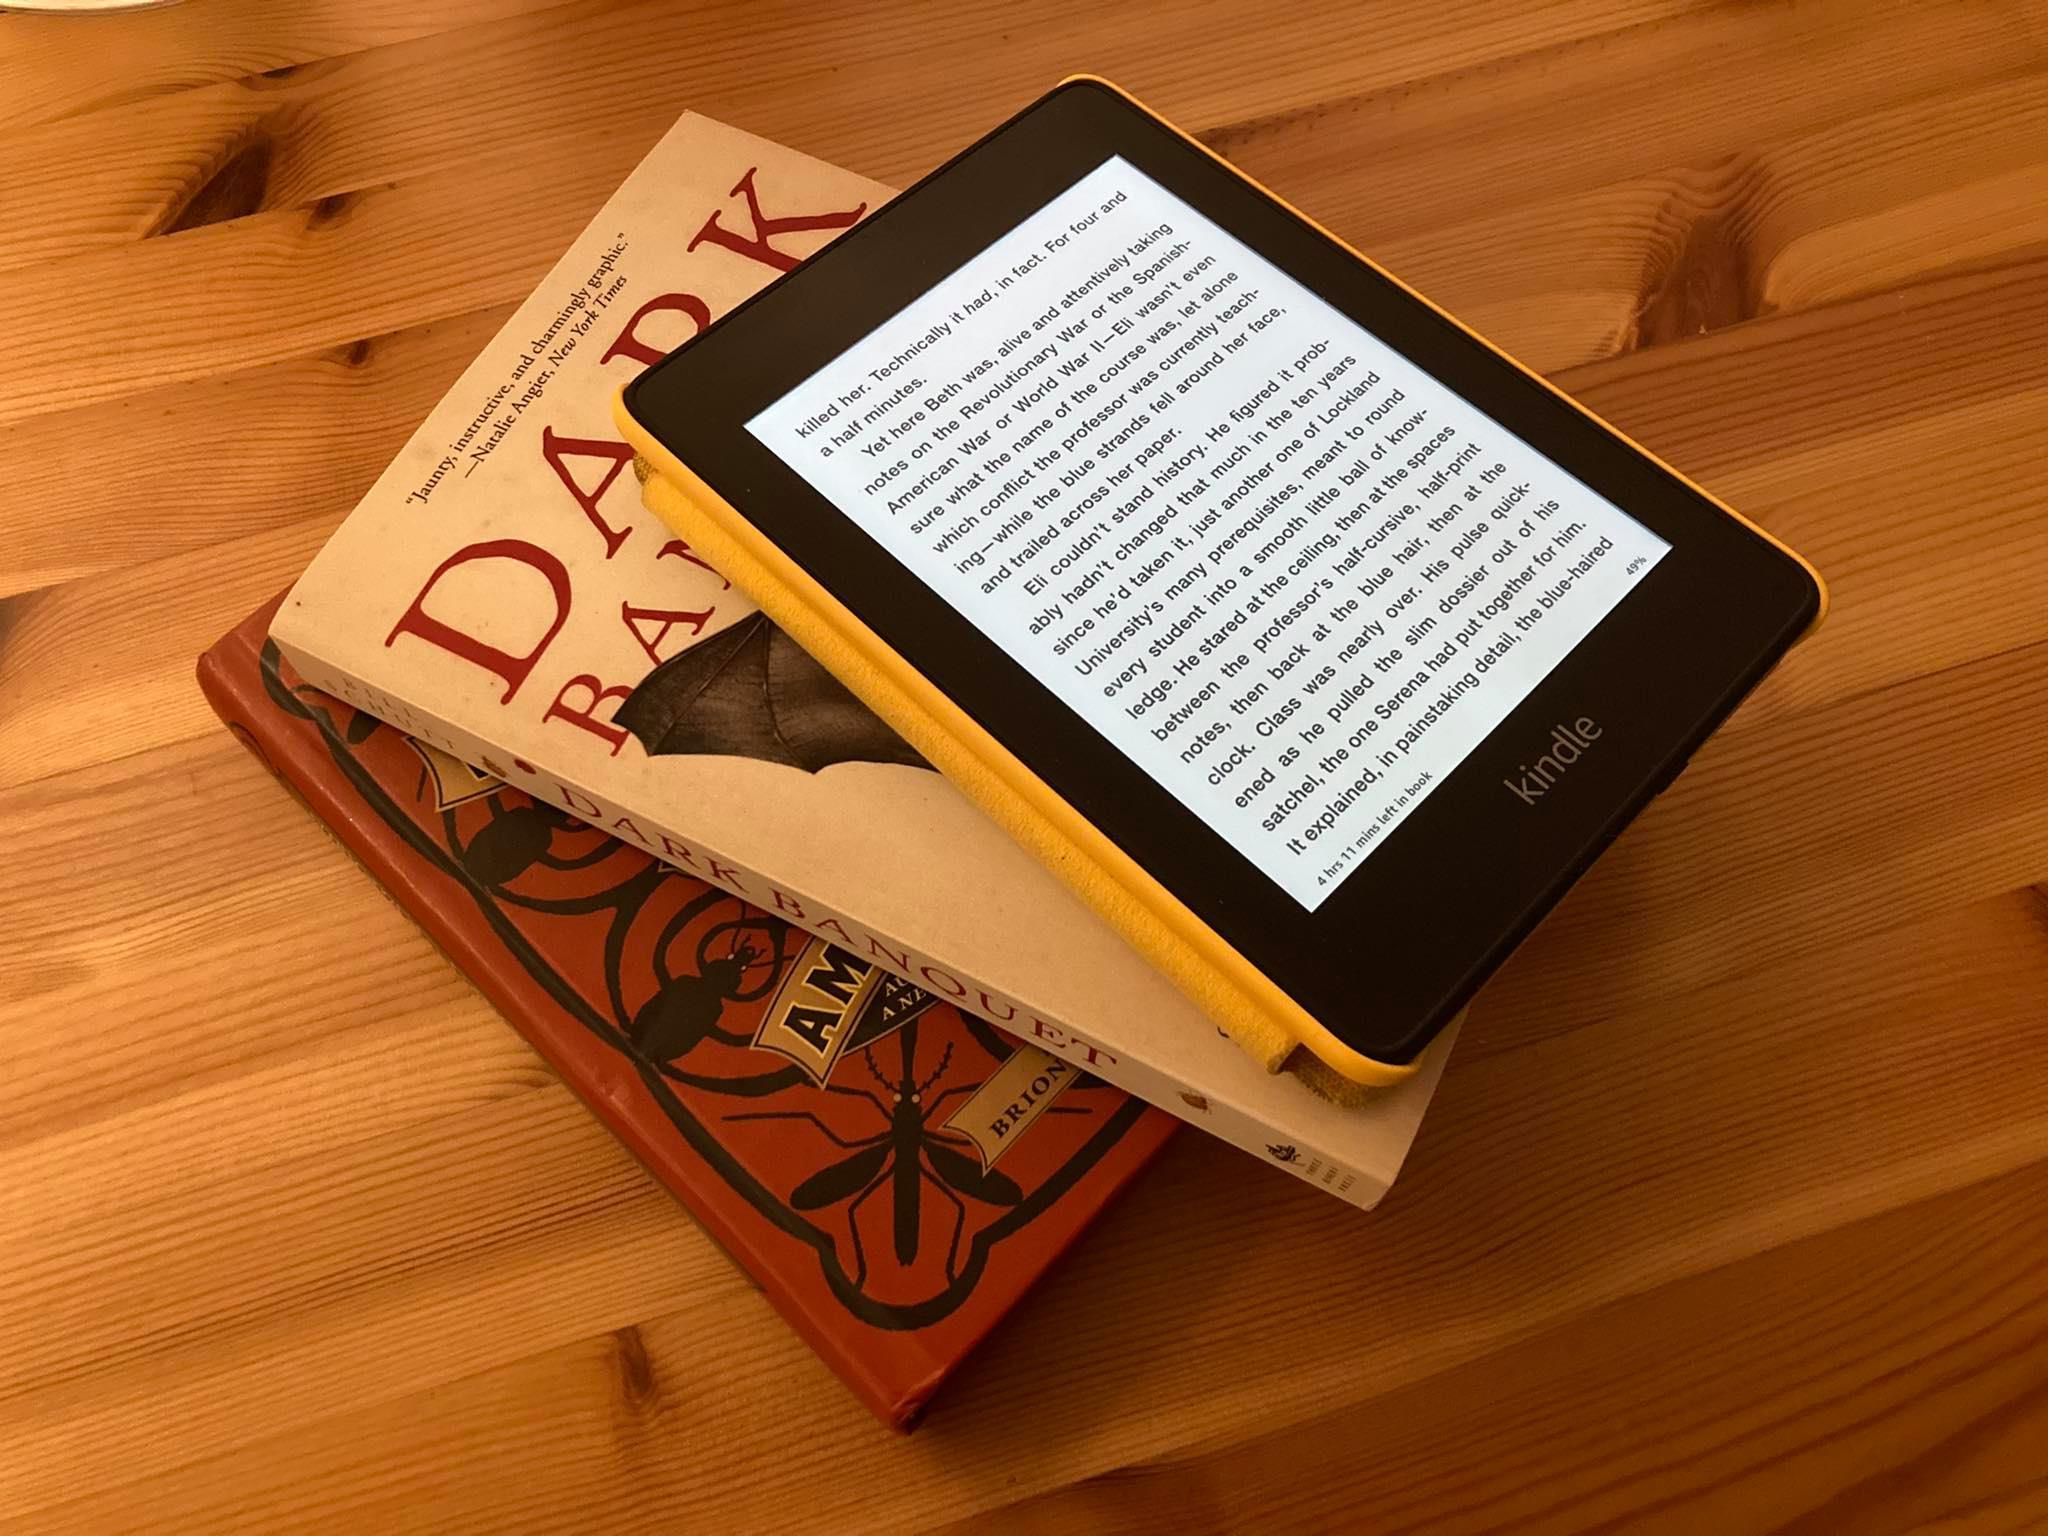 Free Kindle Reading Apps for iOS, Android, Mac, and PC